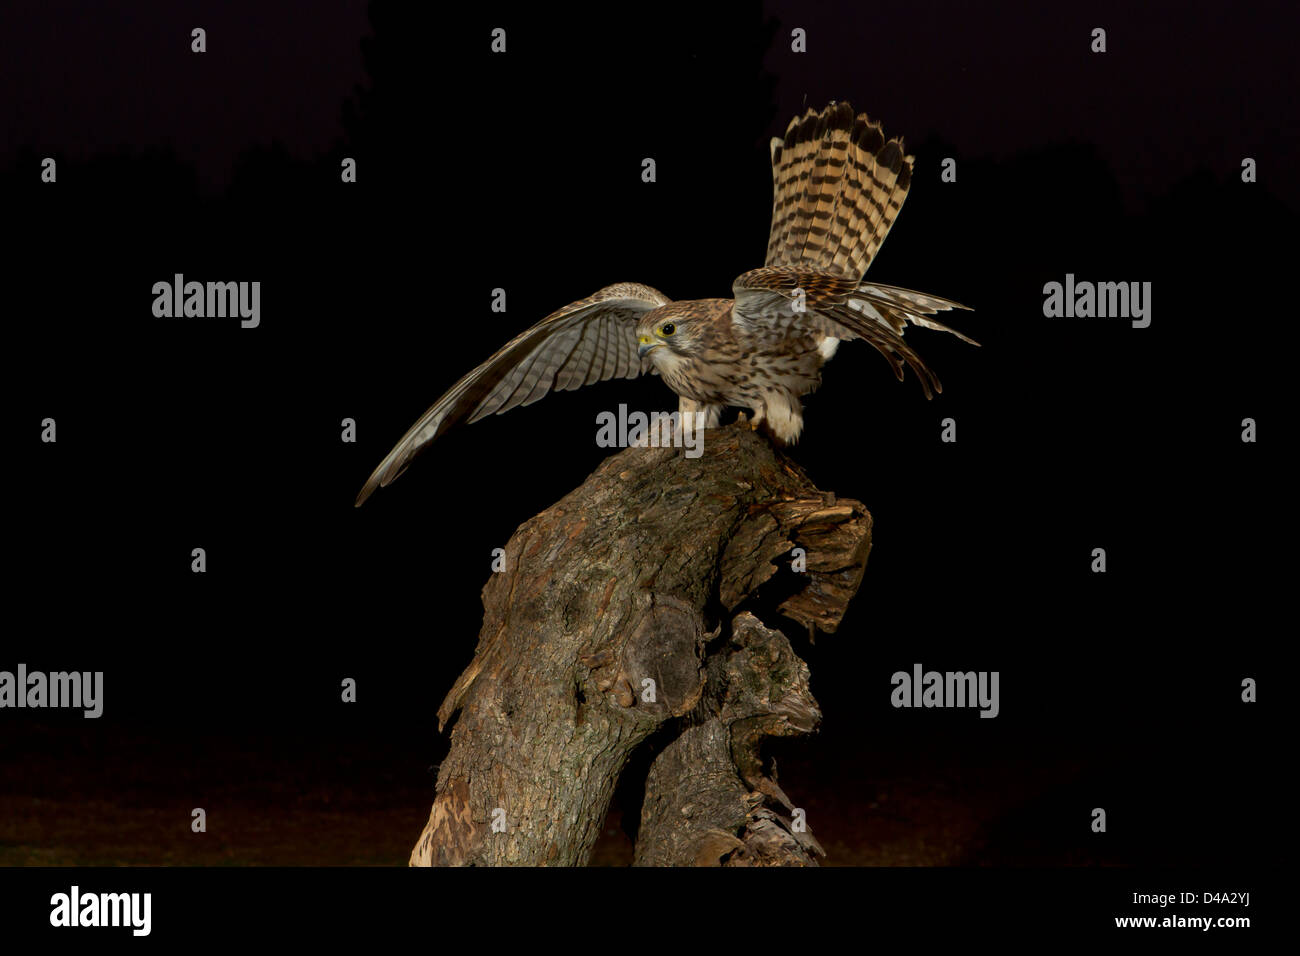 Common kestrel with wings extended on a branch Stock Photo